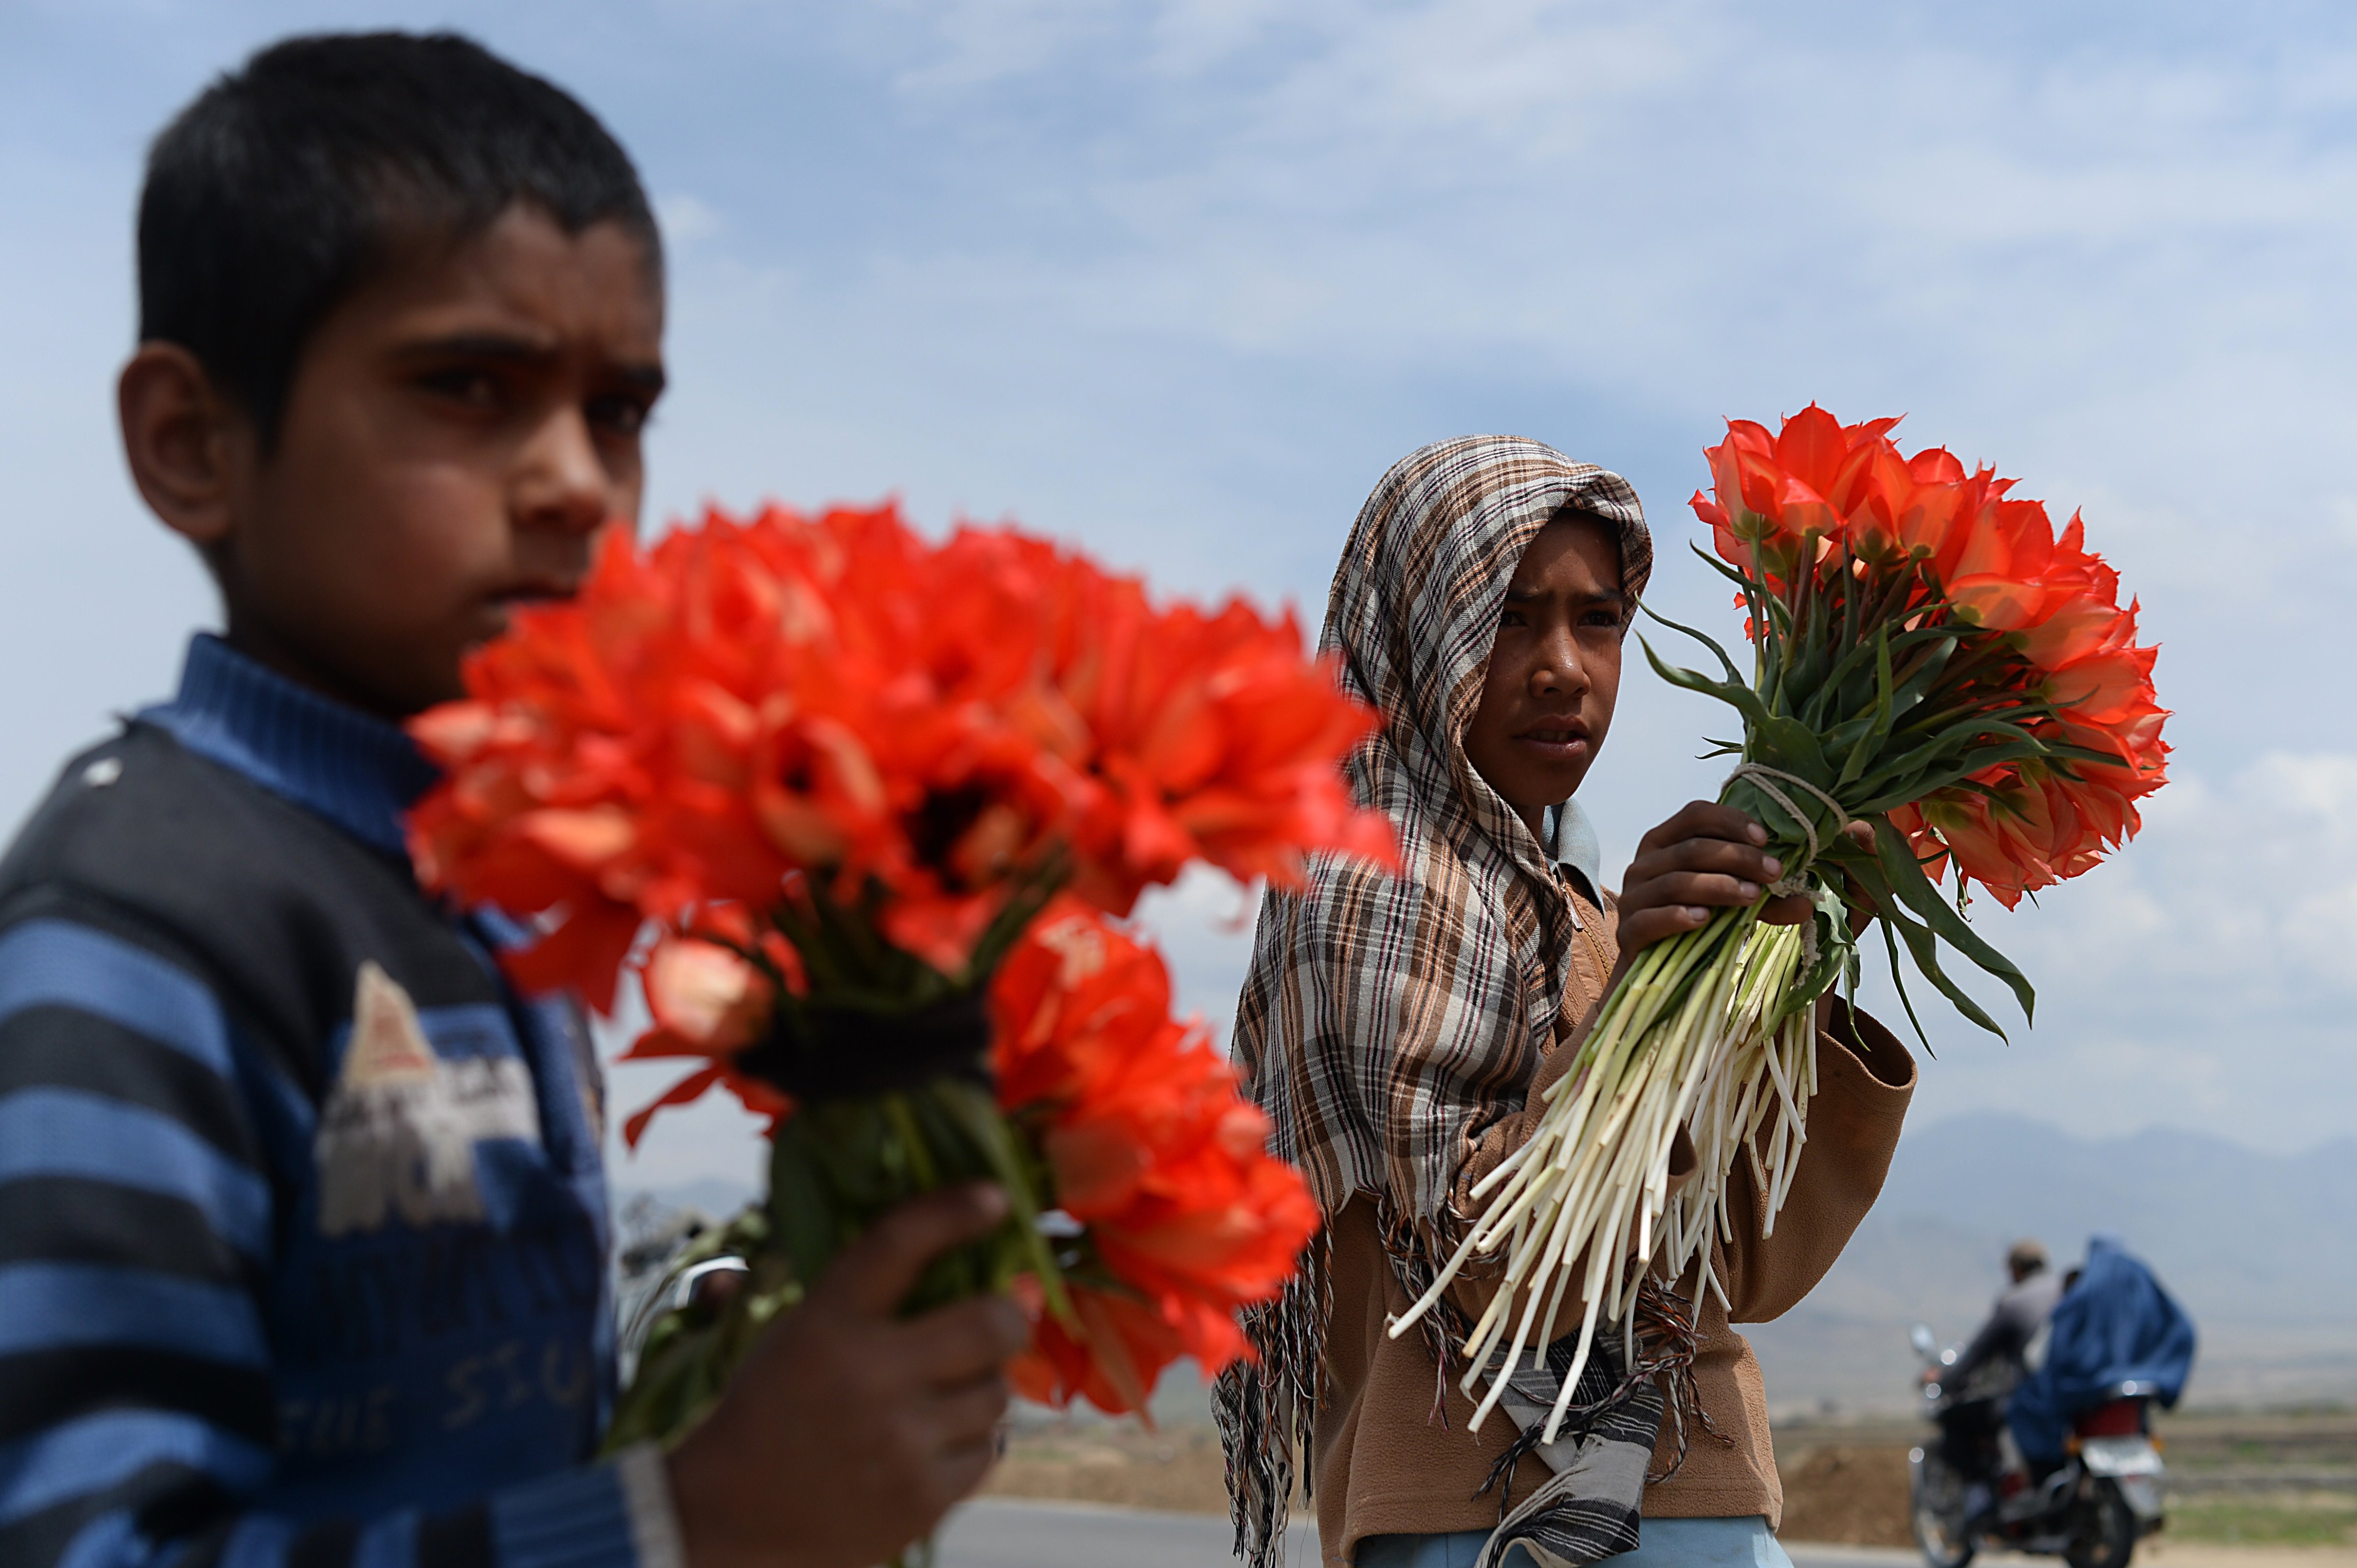 Afghan children Malik, 8, and Popal, 11, wait at a roadside with wild tulips for sale to potential customers driving through the Shamali plains, north of Kabul. (SHAH MARAI&mdash;AFP/Getty Images)